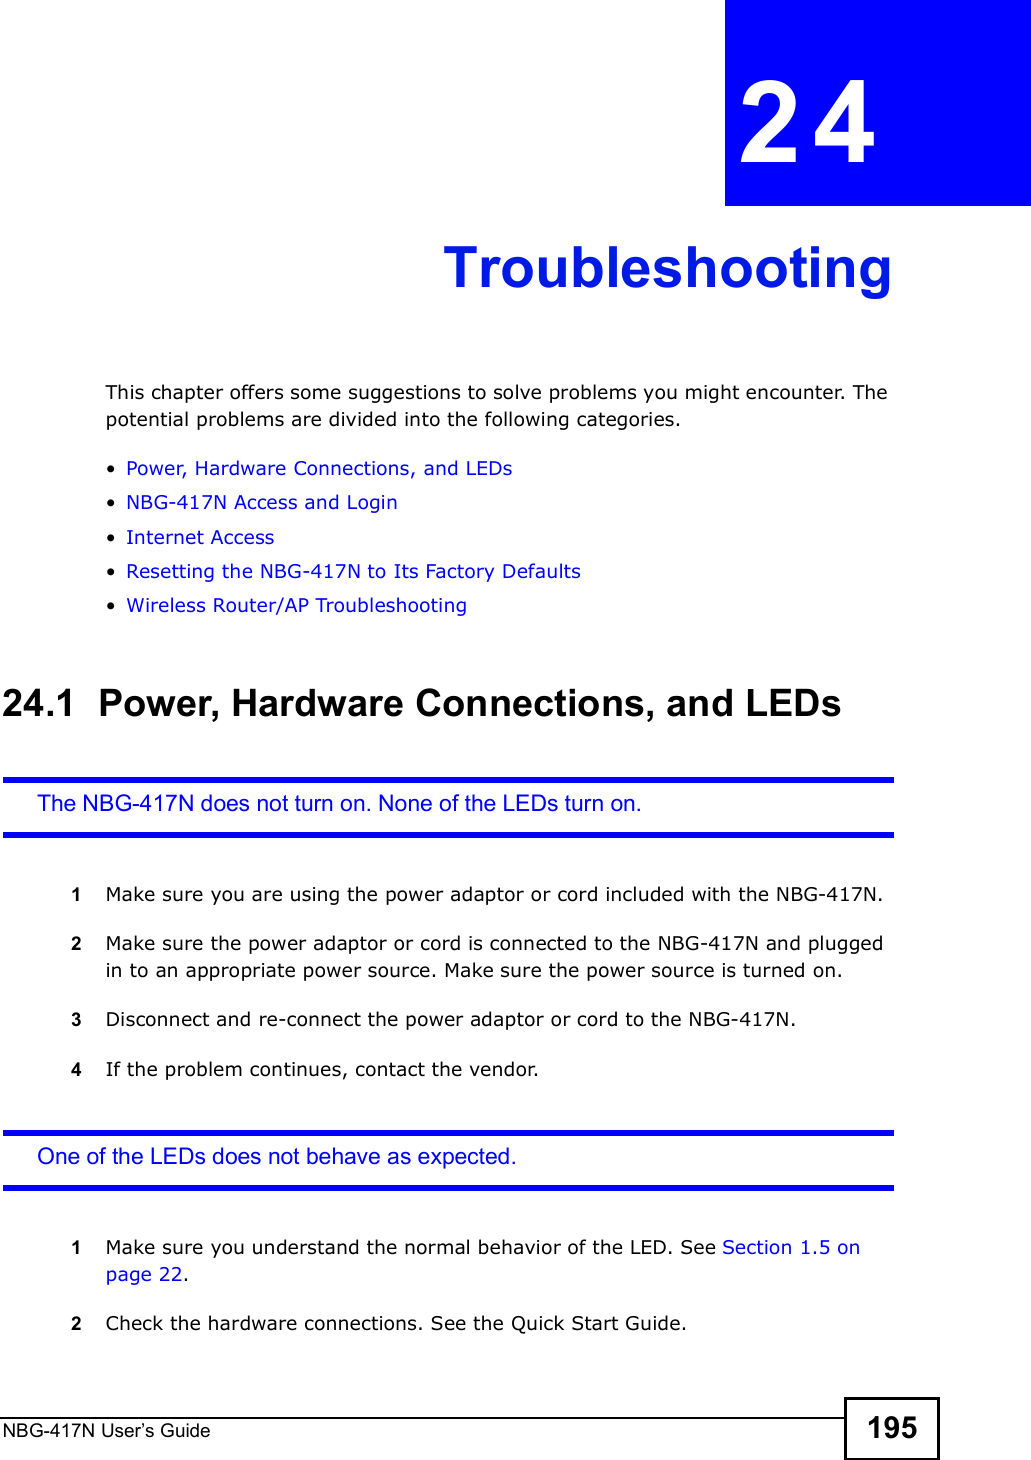 NBG-417N User s Guide 195CHAPTER  24 TroubleshootingThis chapter offers some suggestions to solve problems you might encounter. The potential problems are divided into the following categories.  Power, Hardware Connections, and LEDs NBG-417N Access and Login Internet Access Resetting the NBG-417N to Its Factory Defaults Wireless Router/AP Troubleshooting24.1  Power, Hardware Connections, and LEDsThe NBG-417N does not turn on. None of the LEDs turn on.1Make sure you are using the power adaptor or cord included with the NBG-417N.2Make sure the power adaptor or cord is connected to the NBG-417N and plugged in to an appropriate power source. Make sure the power source is turned on.3Disconnect and re-connect the power adaptor or cord to the NBG-417N.4If the problem continues, contact the vendor.One of the LEDs does not behave as expected.1Make sure you understand the normal behavior of the LED. See Section 1.5 on page 22.2Check the hardware connections. See the Quick Start Guide. 